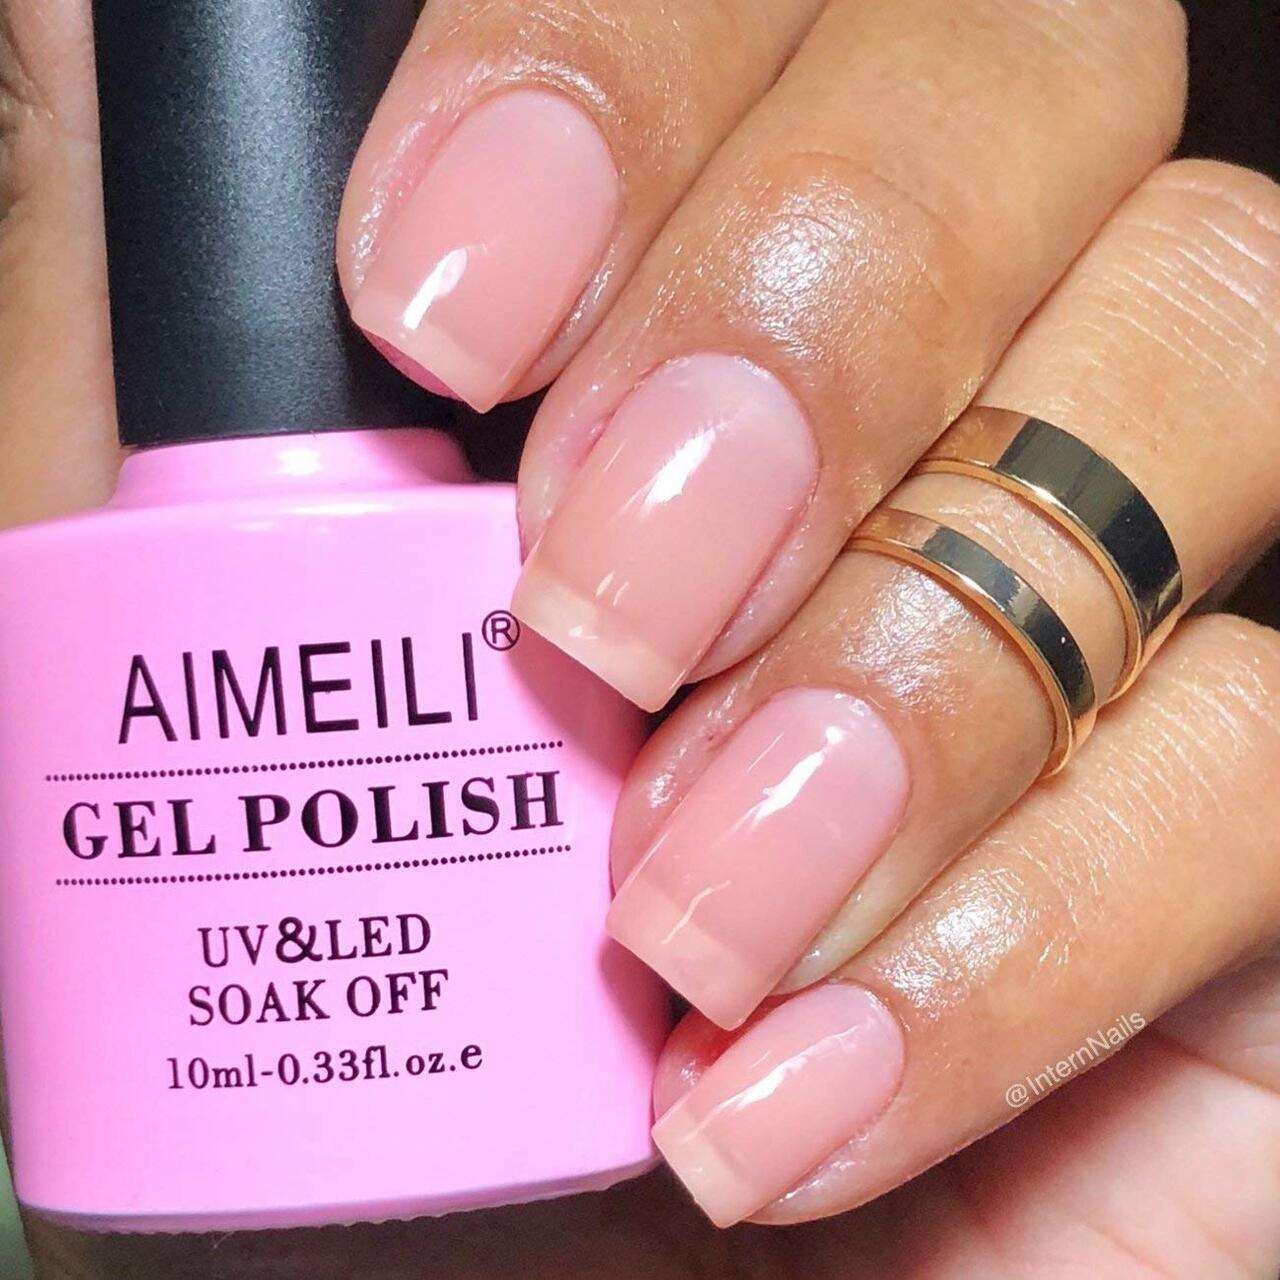 Aimeili Baby Pink Light Gel Polish Nude for Nutural Pink Nail Designs 471